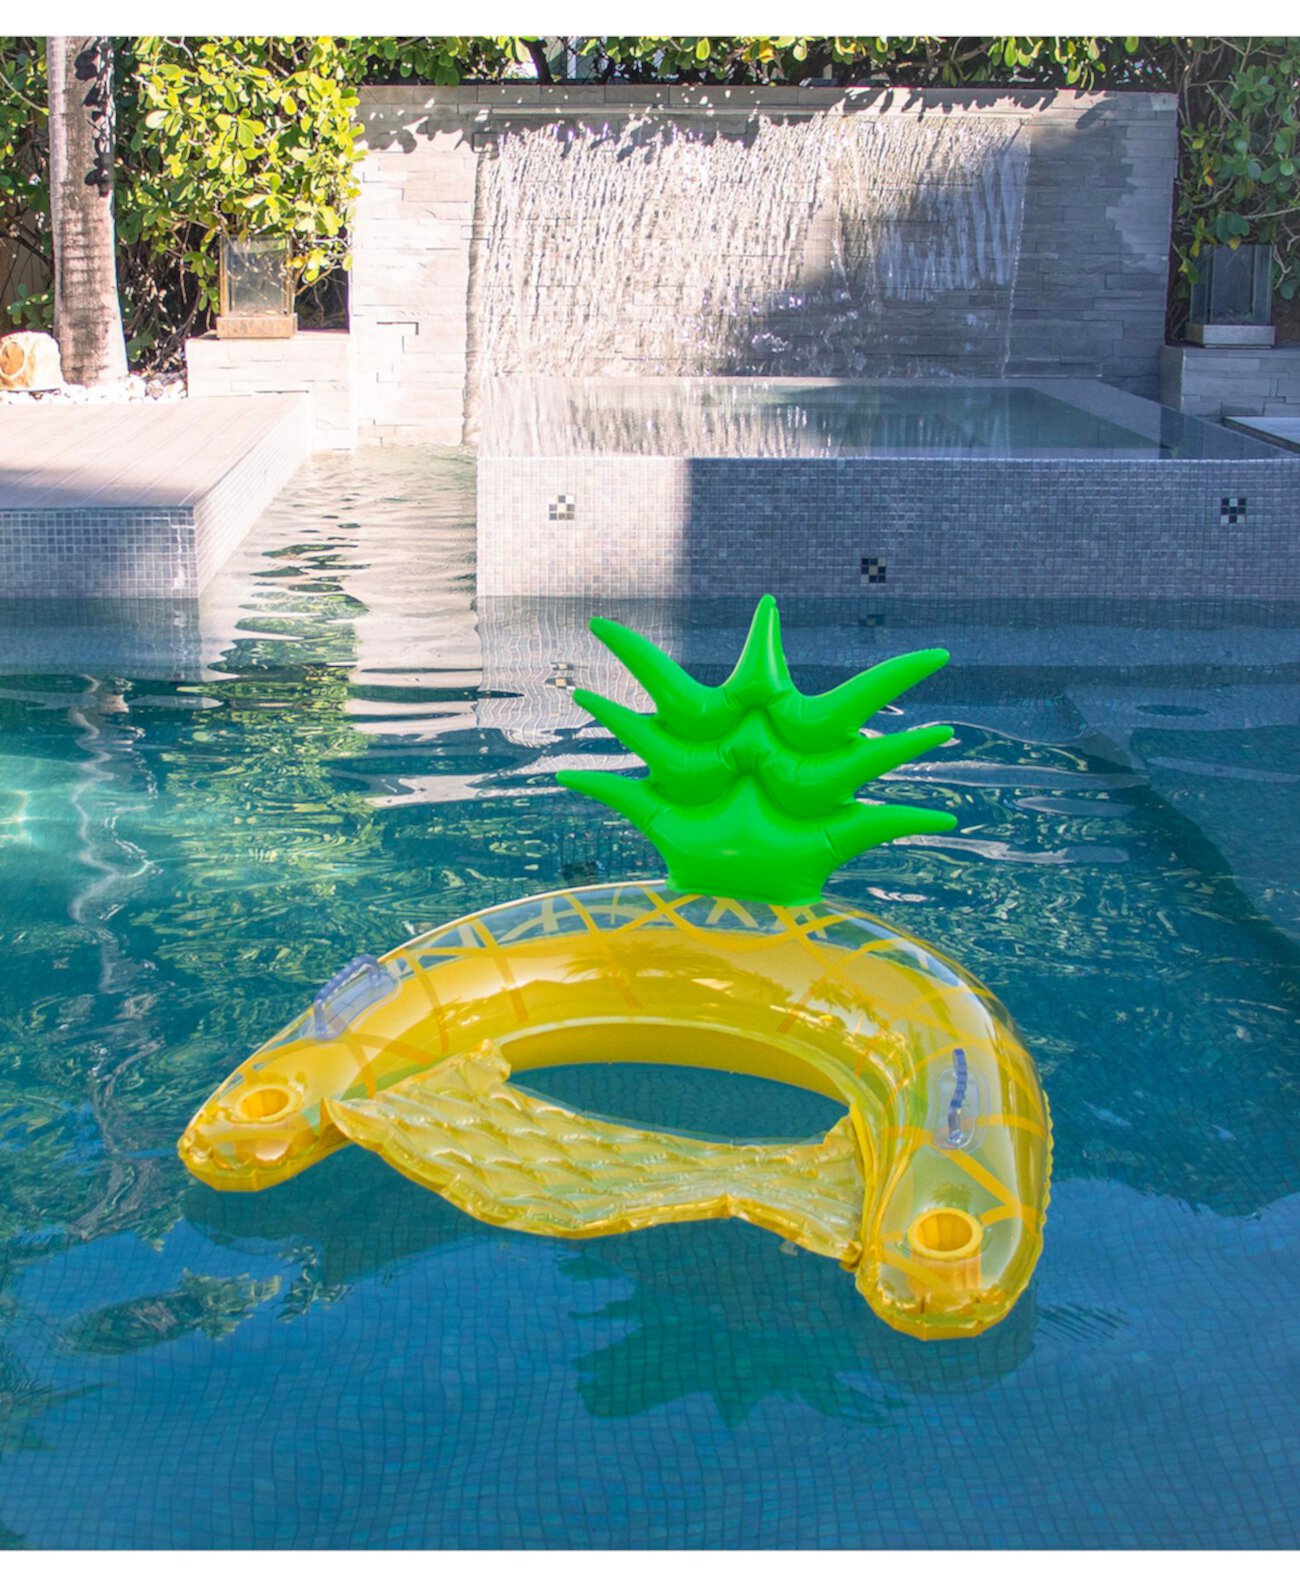 Resort Collection Jumbo Pineapple Sun Chair with Backrest POOLCANDY